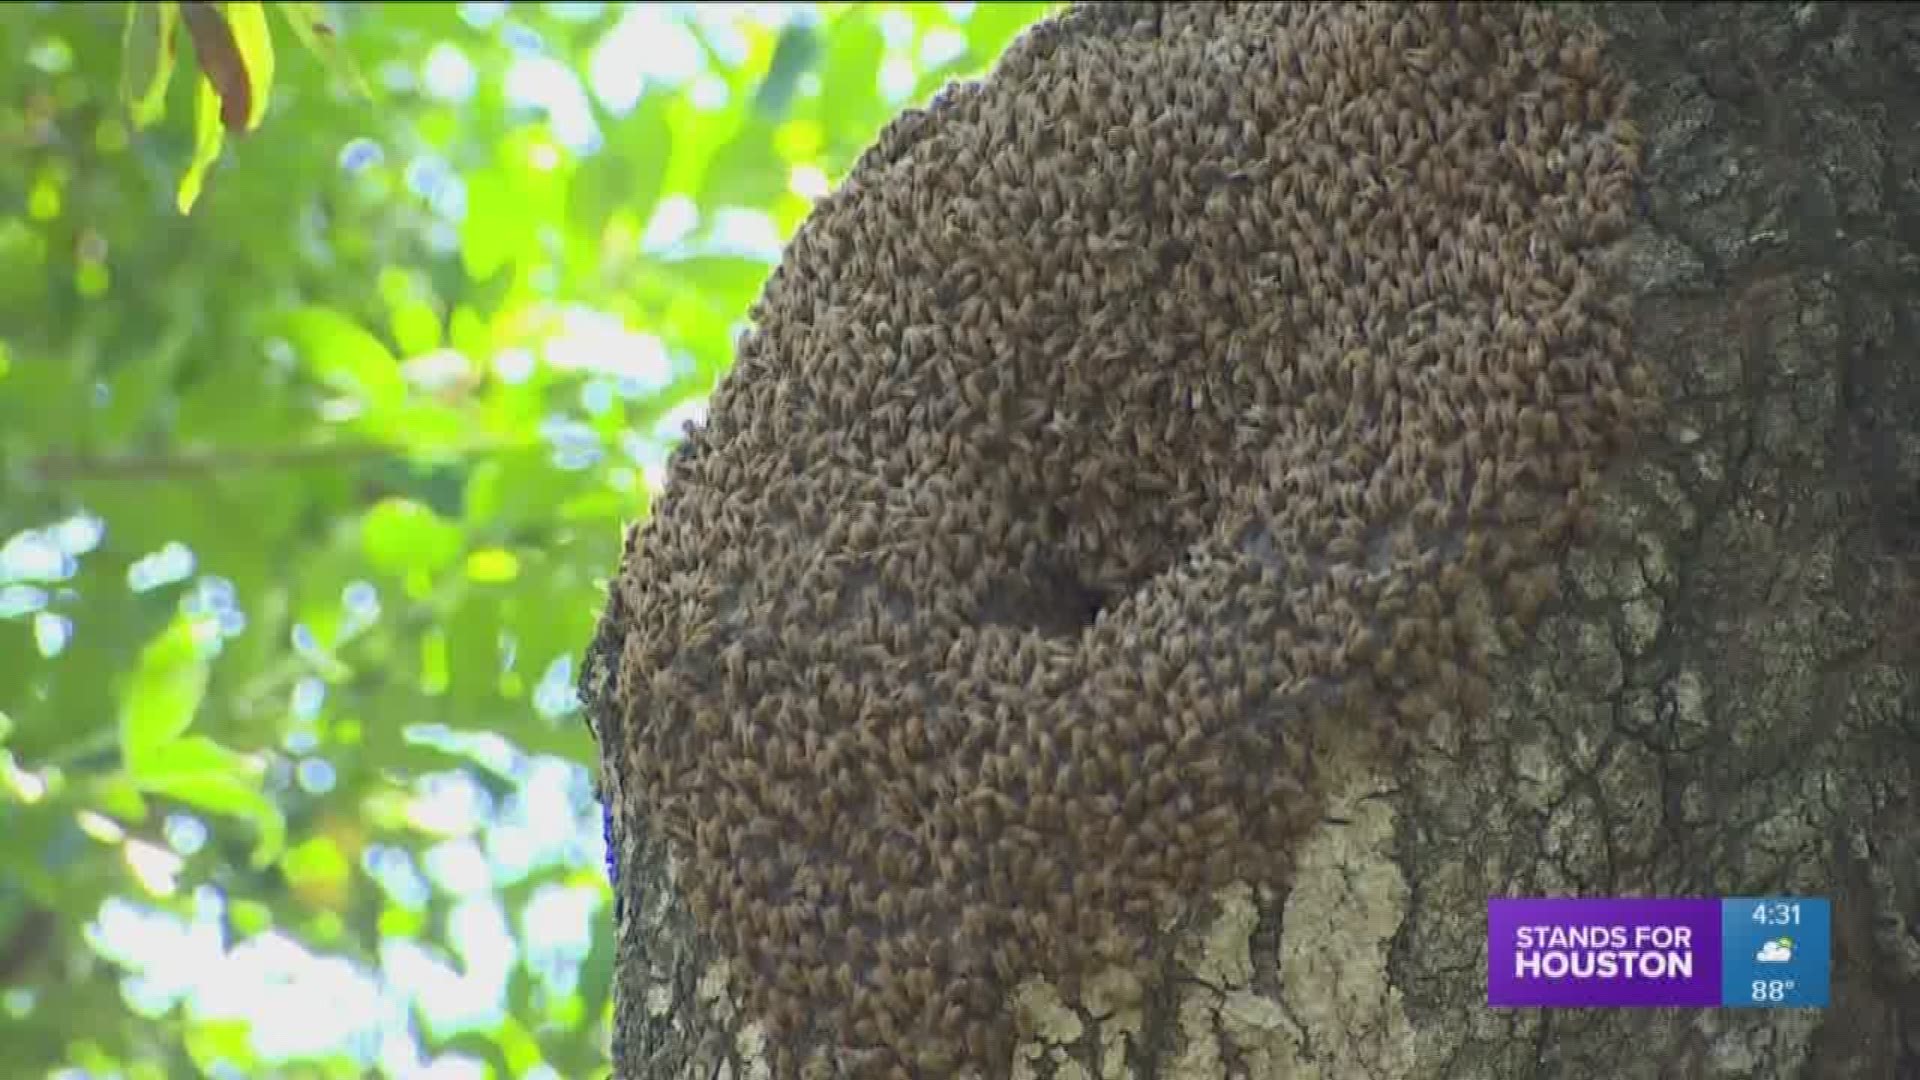 Africanized "killer" bees are the type of bees one expert says have swarmed into several colonies in River Oaks.